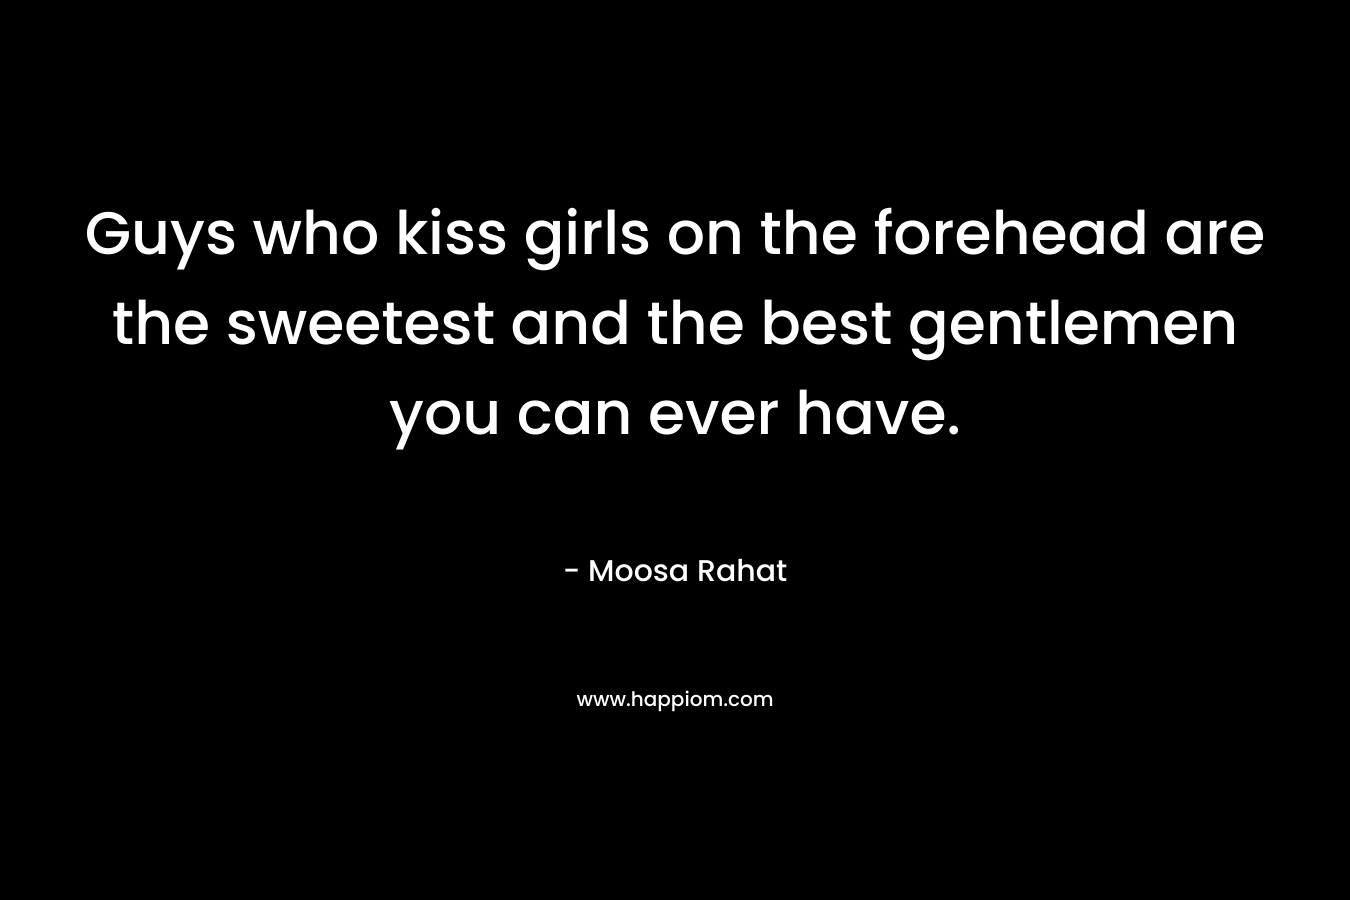 Guys who kiss girls on the forehead are the sweetest and the best gentlemen you can ever have. – Moosa Rahat